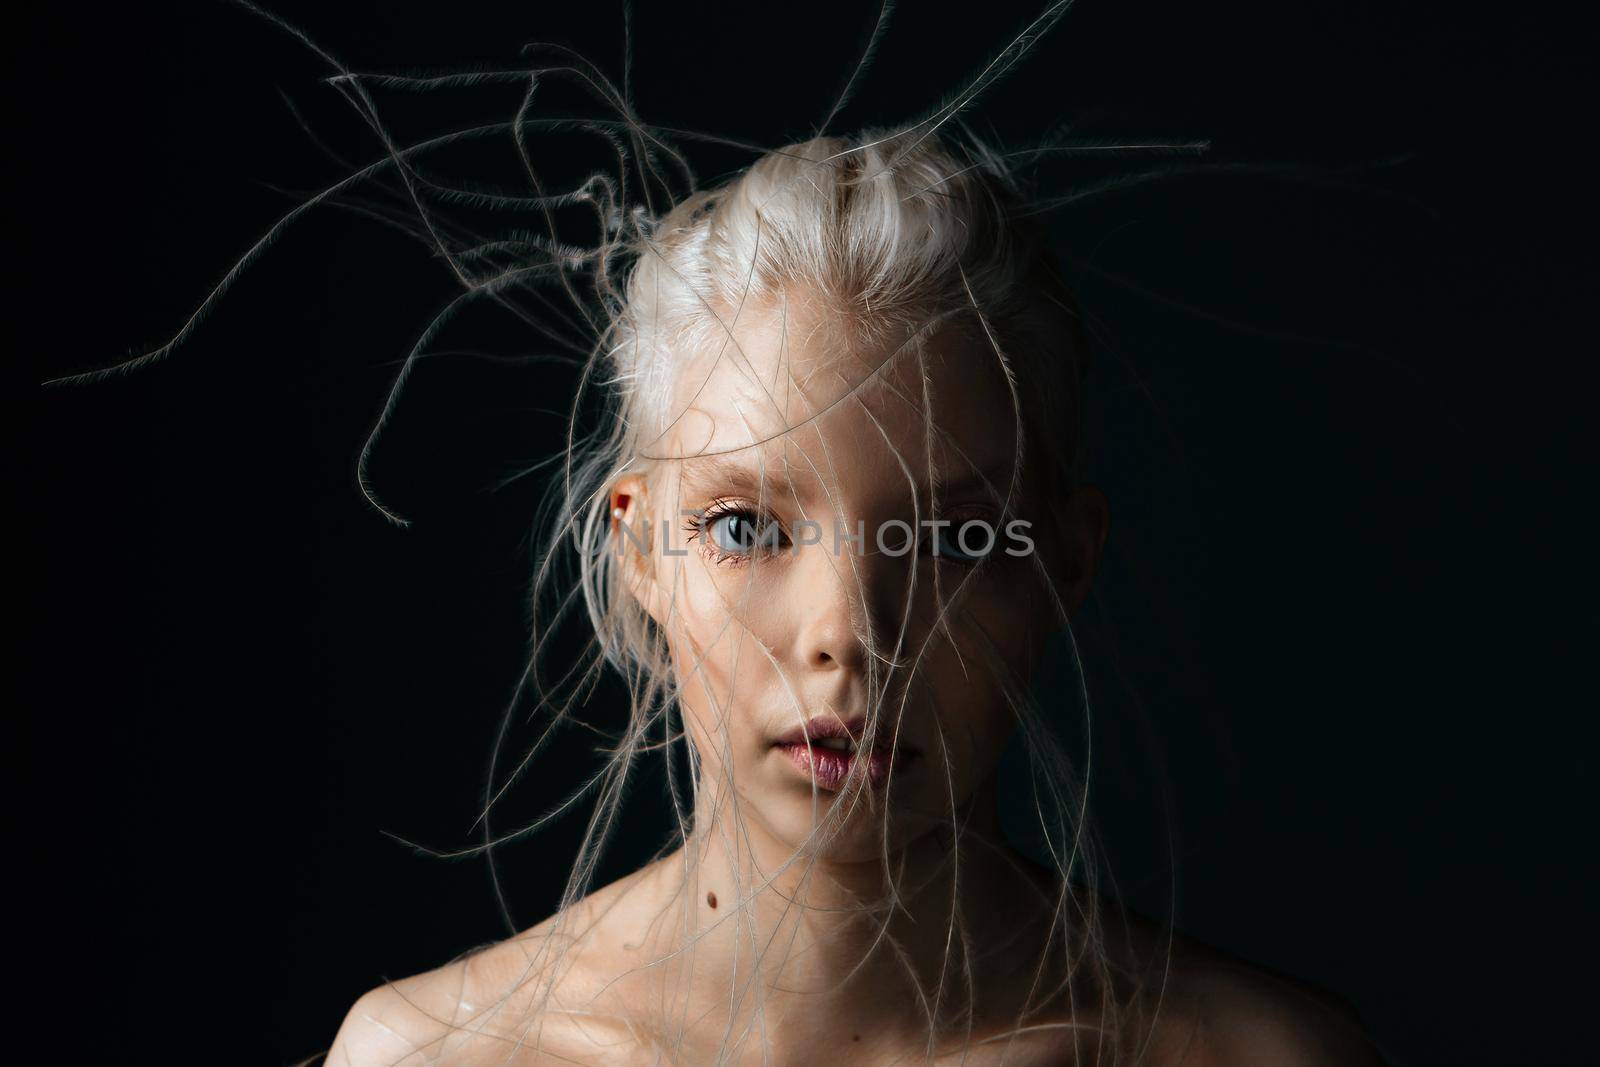 Portrait of a girl with lively curly hair. A young gorgon jellyfish from mythology. Art object